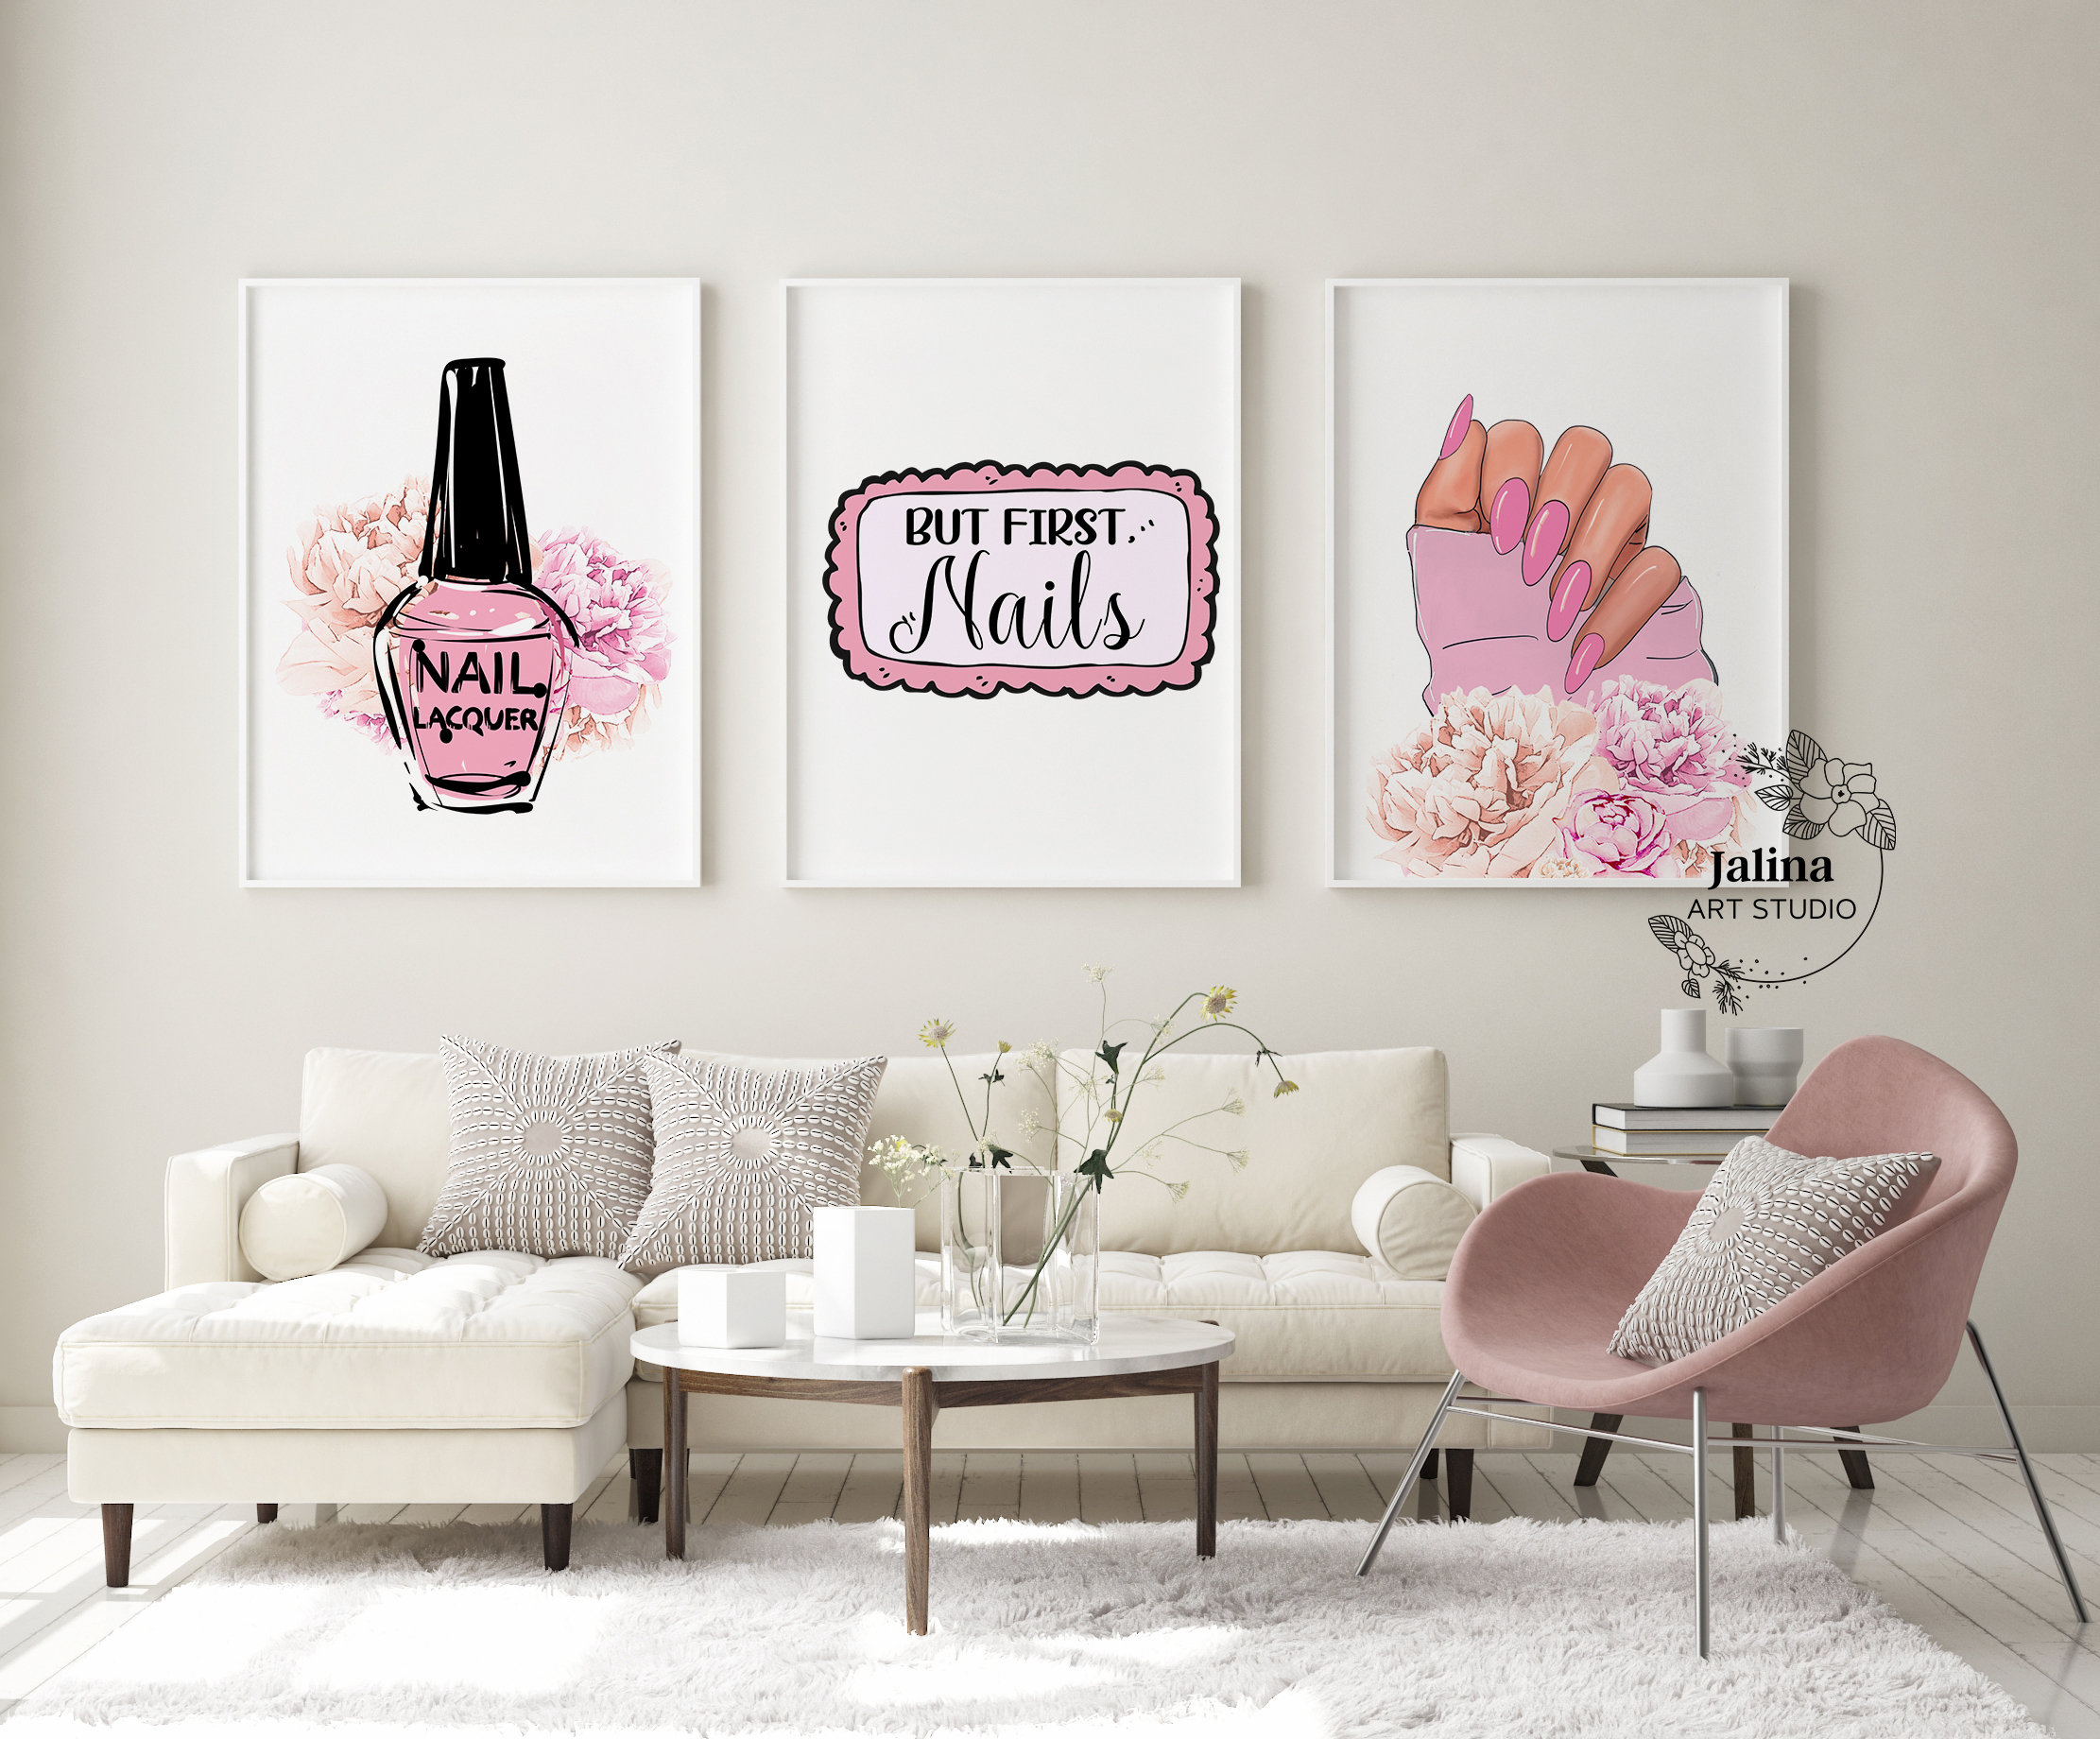 Unique Screw and Nail Wall Art Ideas - wide 6